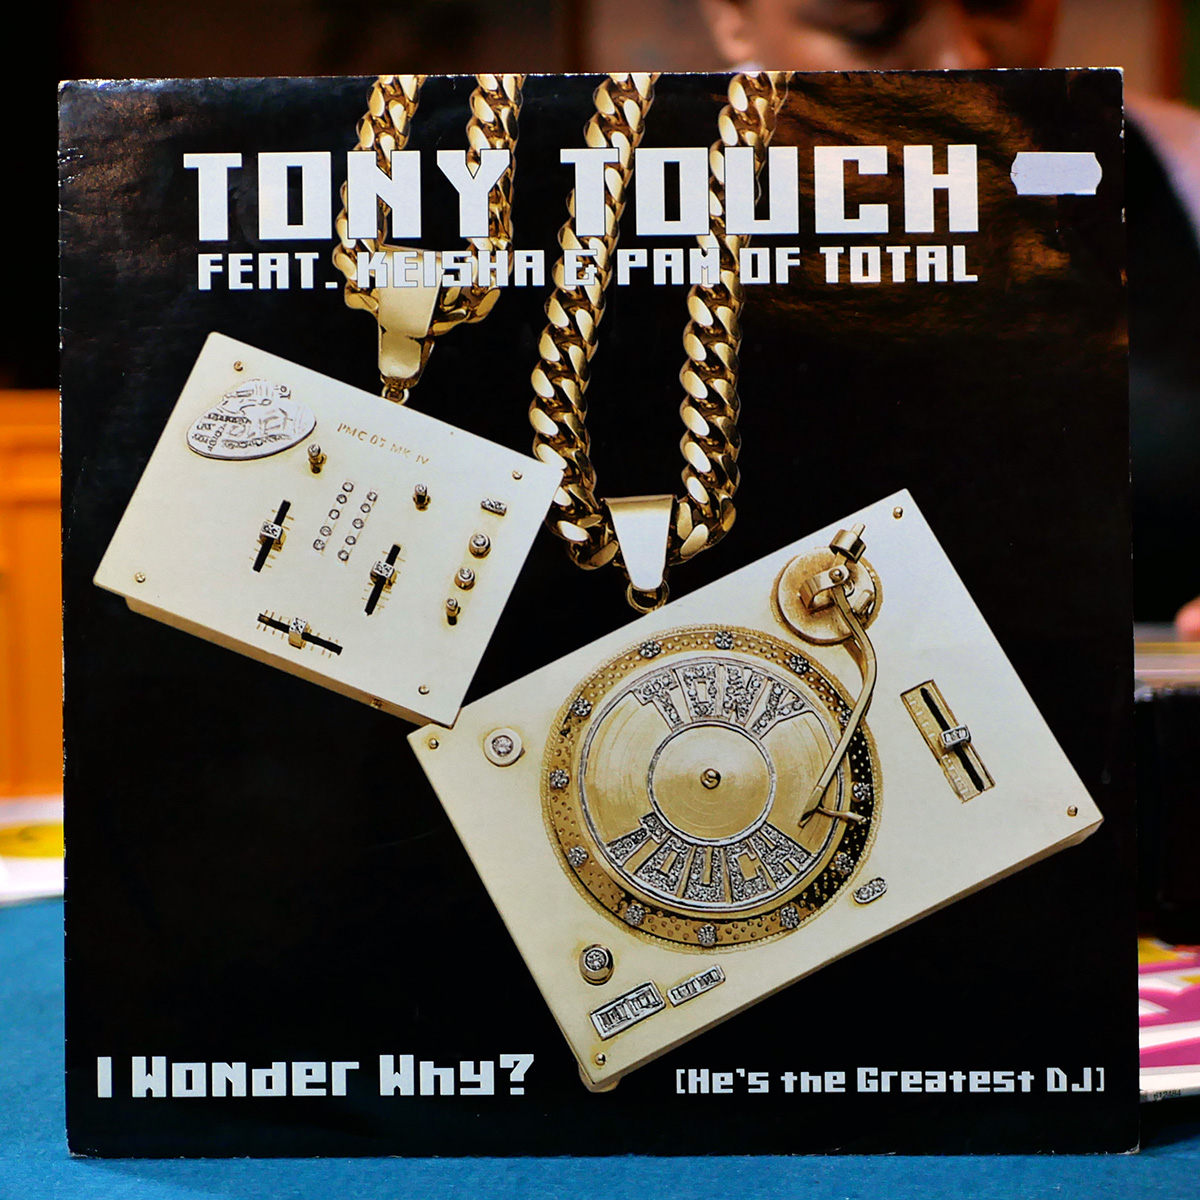 Tony Touch feat. Keisha & Pam* of Total – I Wonder Why? (He's the Greatest DJ) [12", 2000]